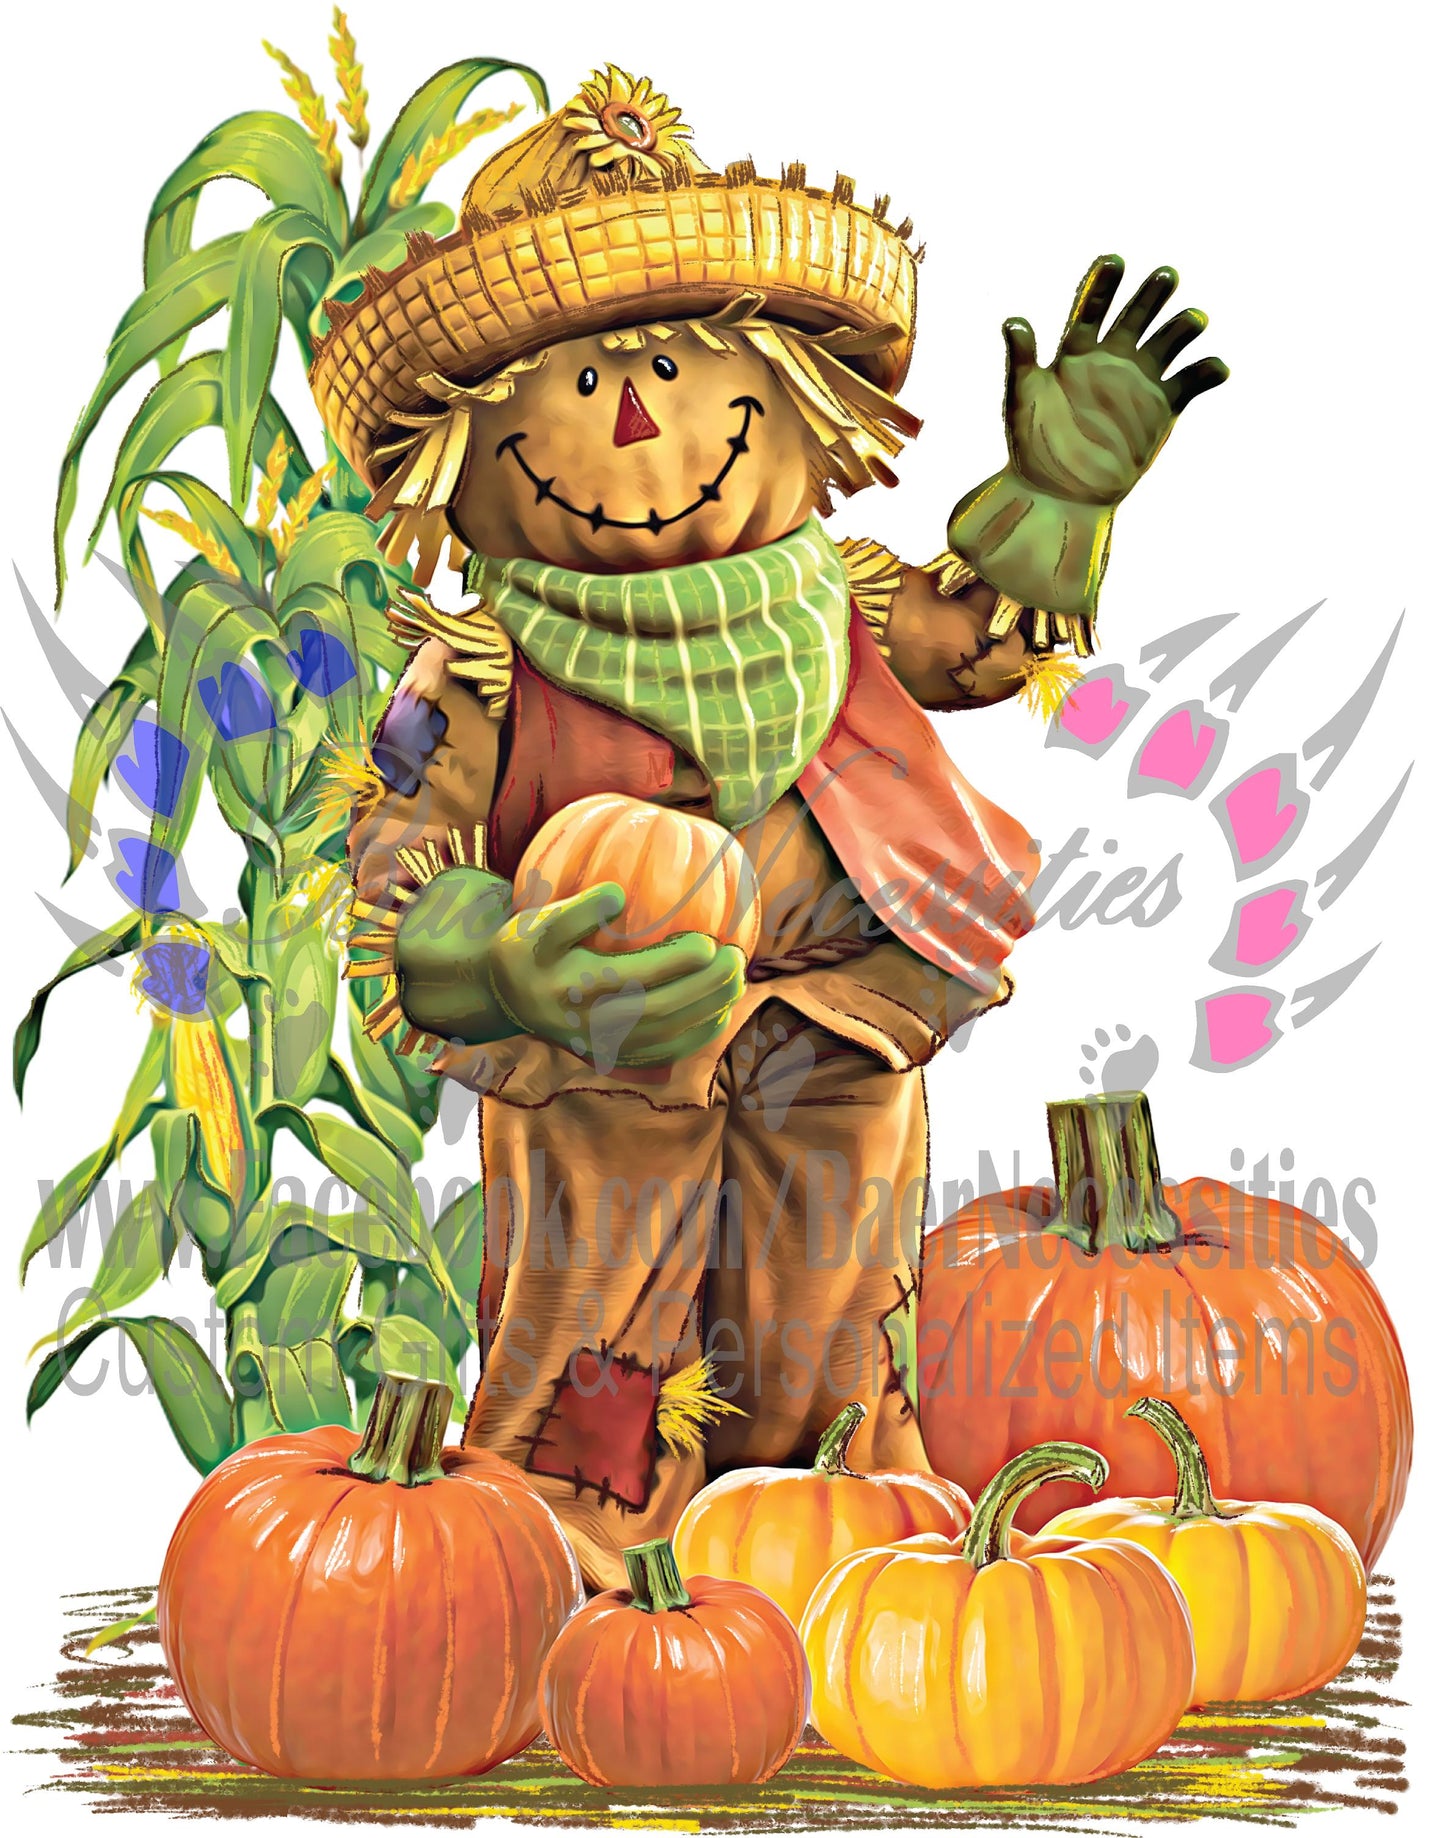 Scarecrow with pumpkins - Transfer